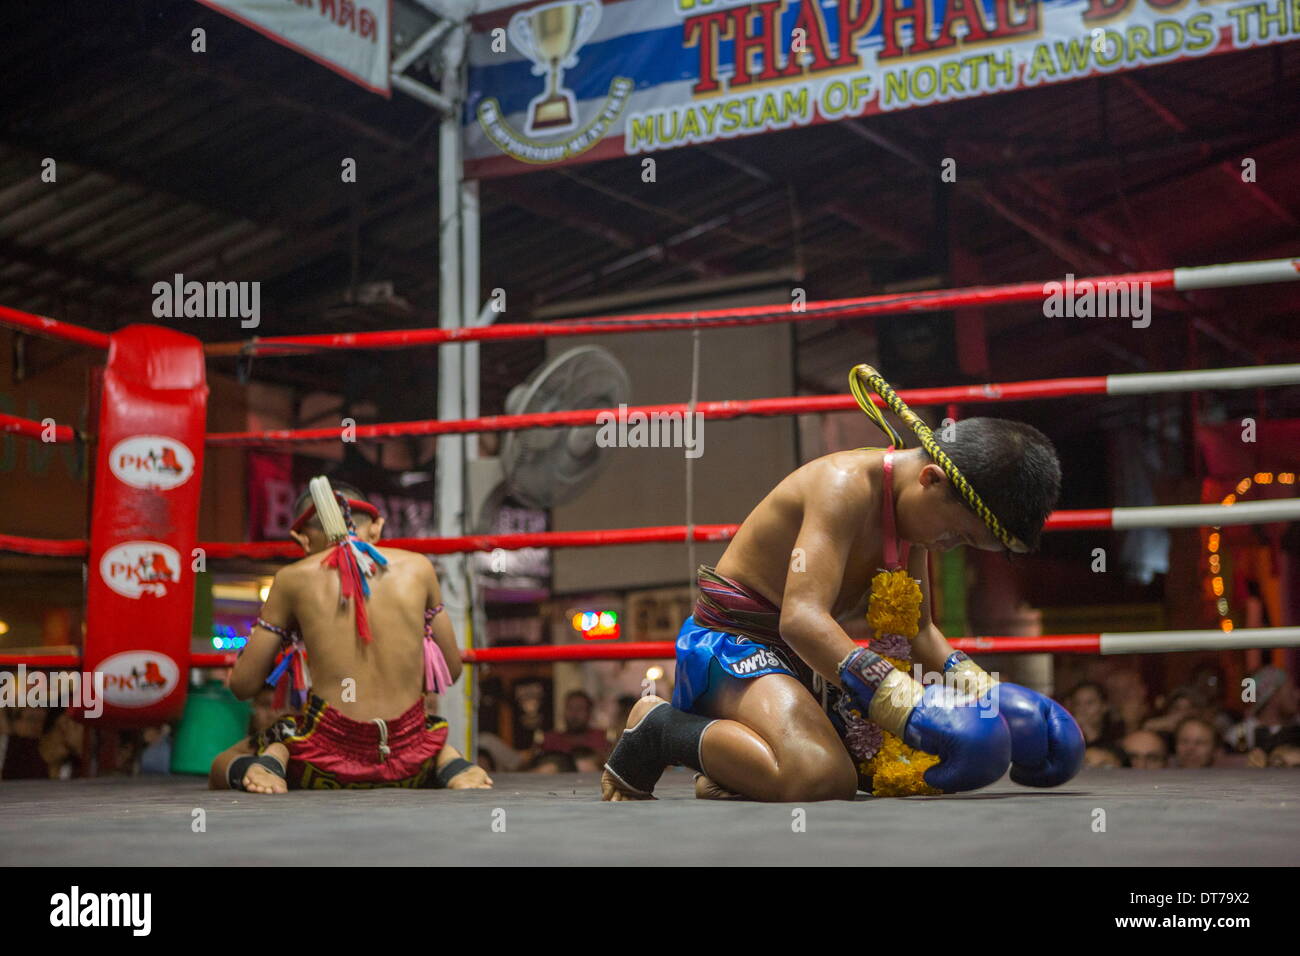 Chiang Mai, Thailand. 24th Jan, 2014. Focus and his opponent perform an elaborate ritual before their fight at the Thapae Muay Thai Stadium in Chiang Mai. PETCHFOGUS SITTHAHARNAEK, 9, aka Focus is the top fighter for his age and weight in Chiang Mai. He has begun fighting older, heavier opponents to continue to improve his skills. Fighters are typically paid 1000 baht ($30) per fight. © Taylor Weidman/ZUMA Wire/ZUMAPRESS.com/Alamy Live News Stock Photo